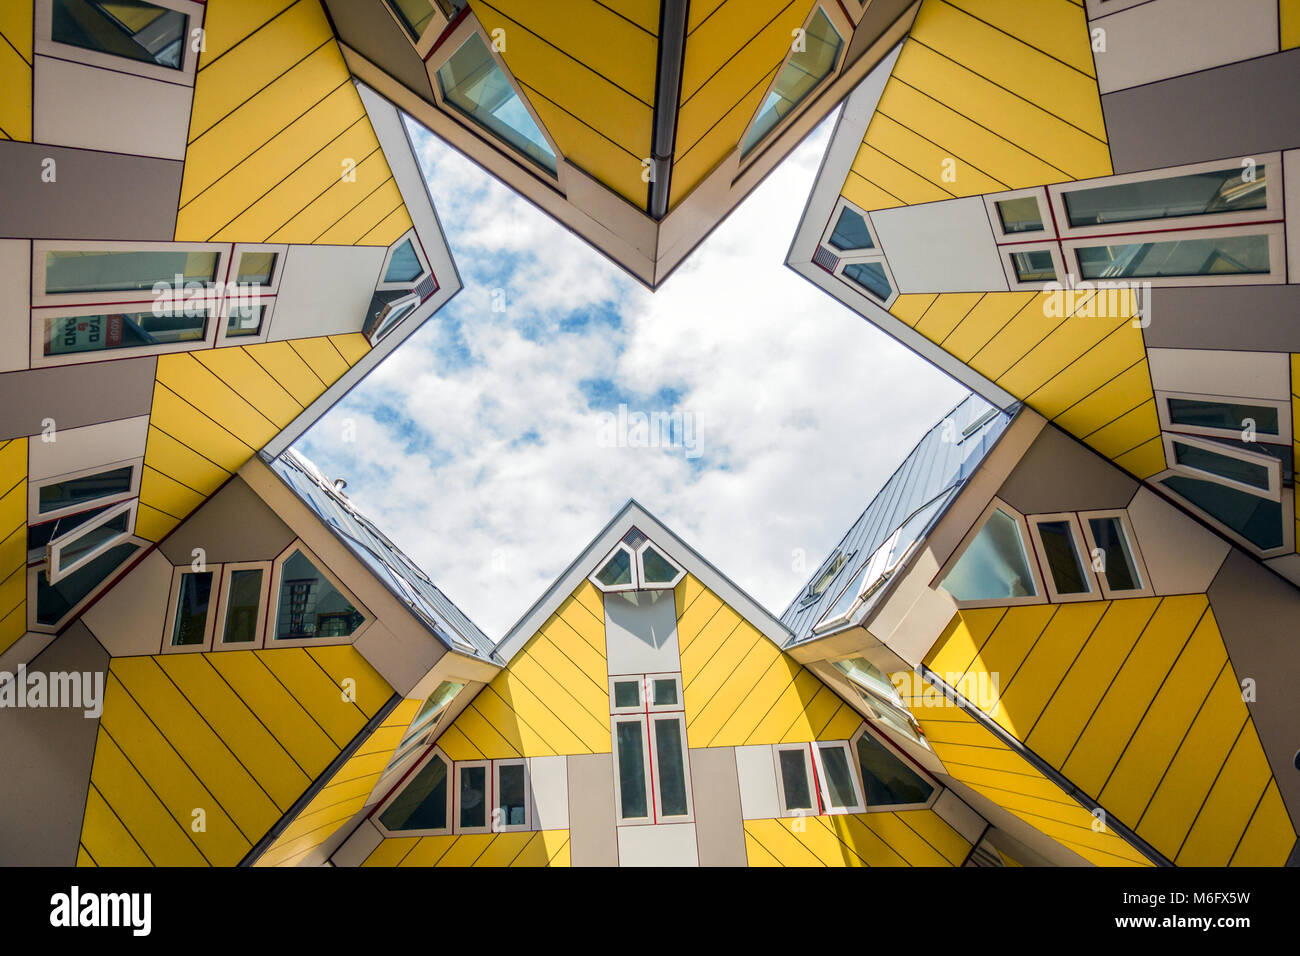 ROTTERDAM, NETHERLANDS - SEP 8, 2013: Cube houses designed by Piet Blom. The design represents a village where each house represents a tree. Stock Photo